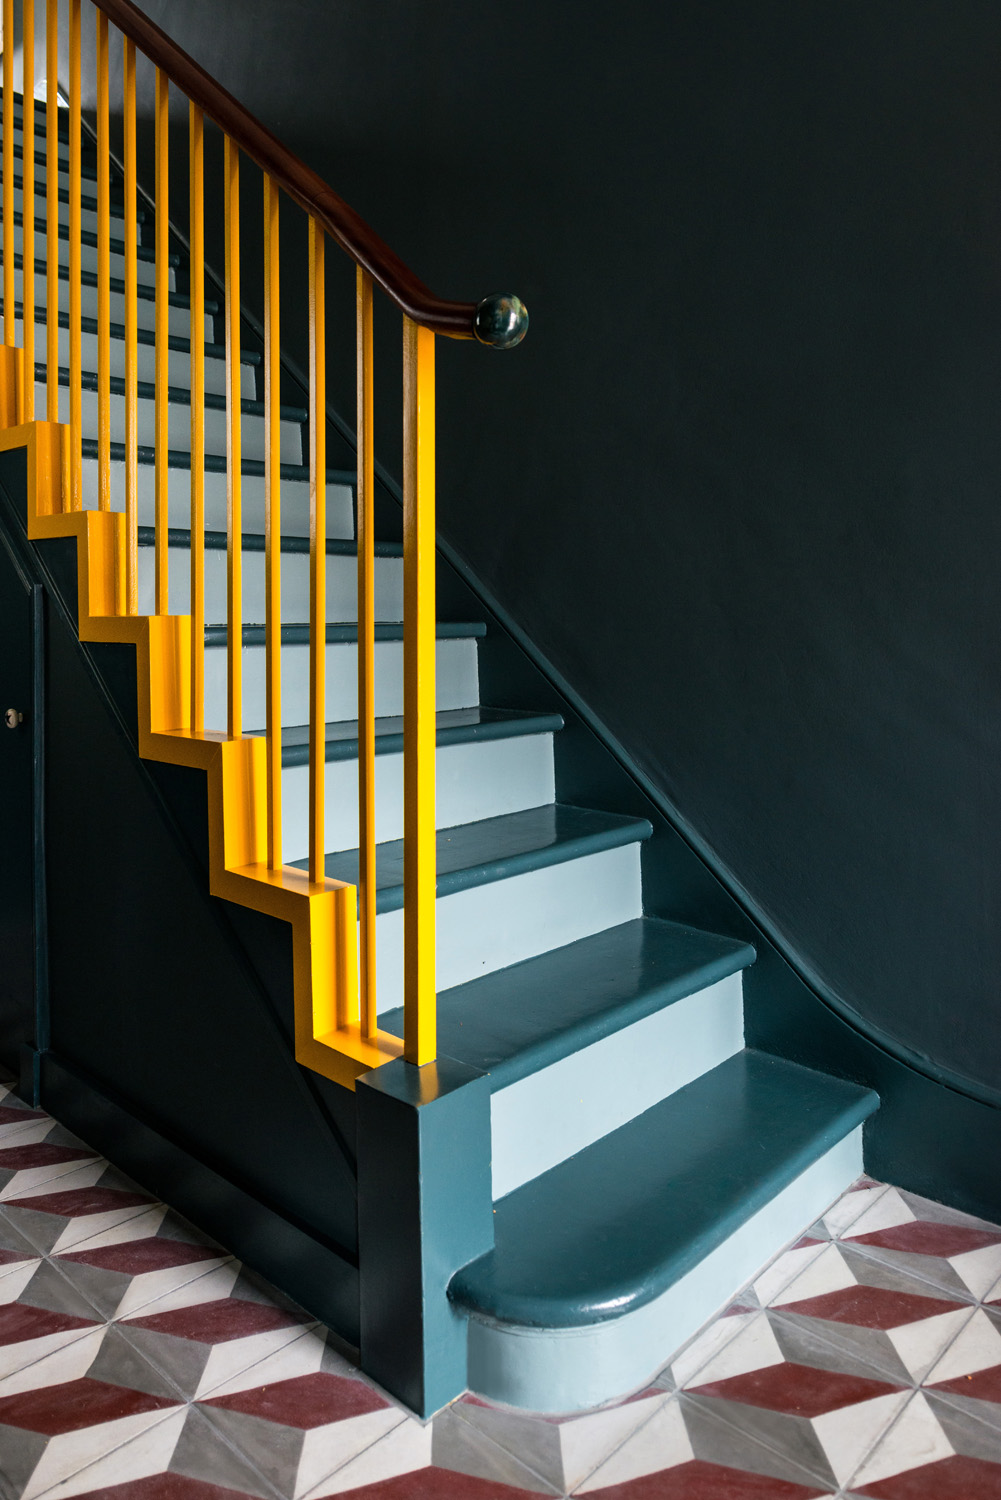 Staircase by Office S&amp;M - modern architecture and interior design studio in London